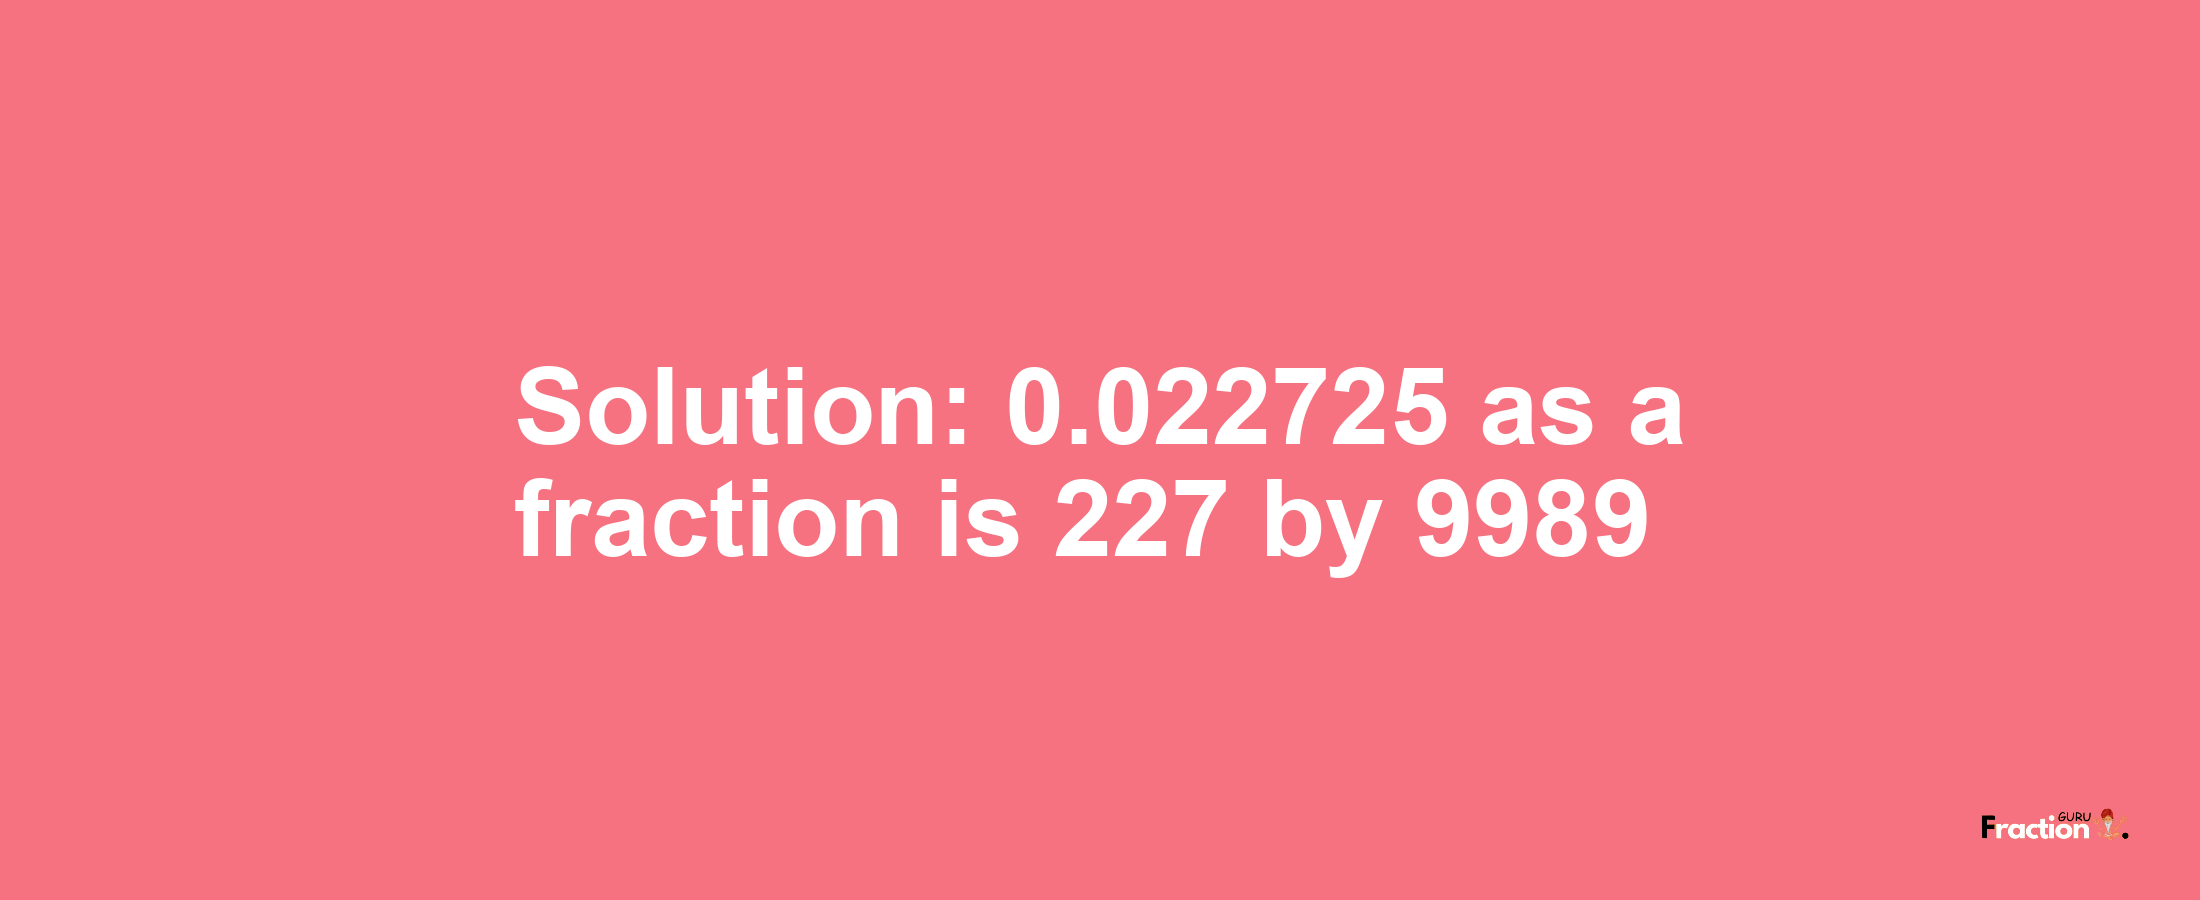 Solution:0.022725 as a fraction is 227/9989